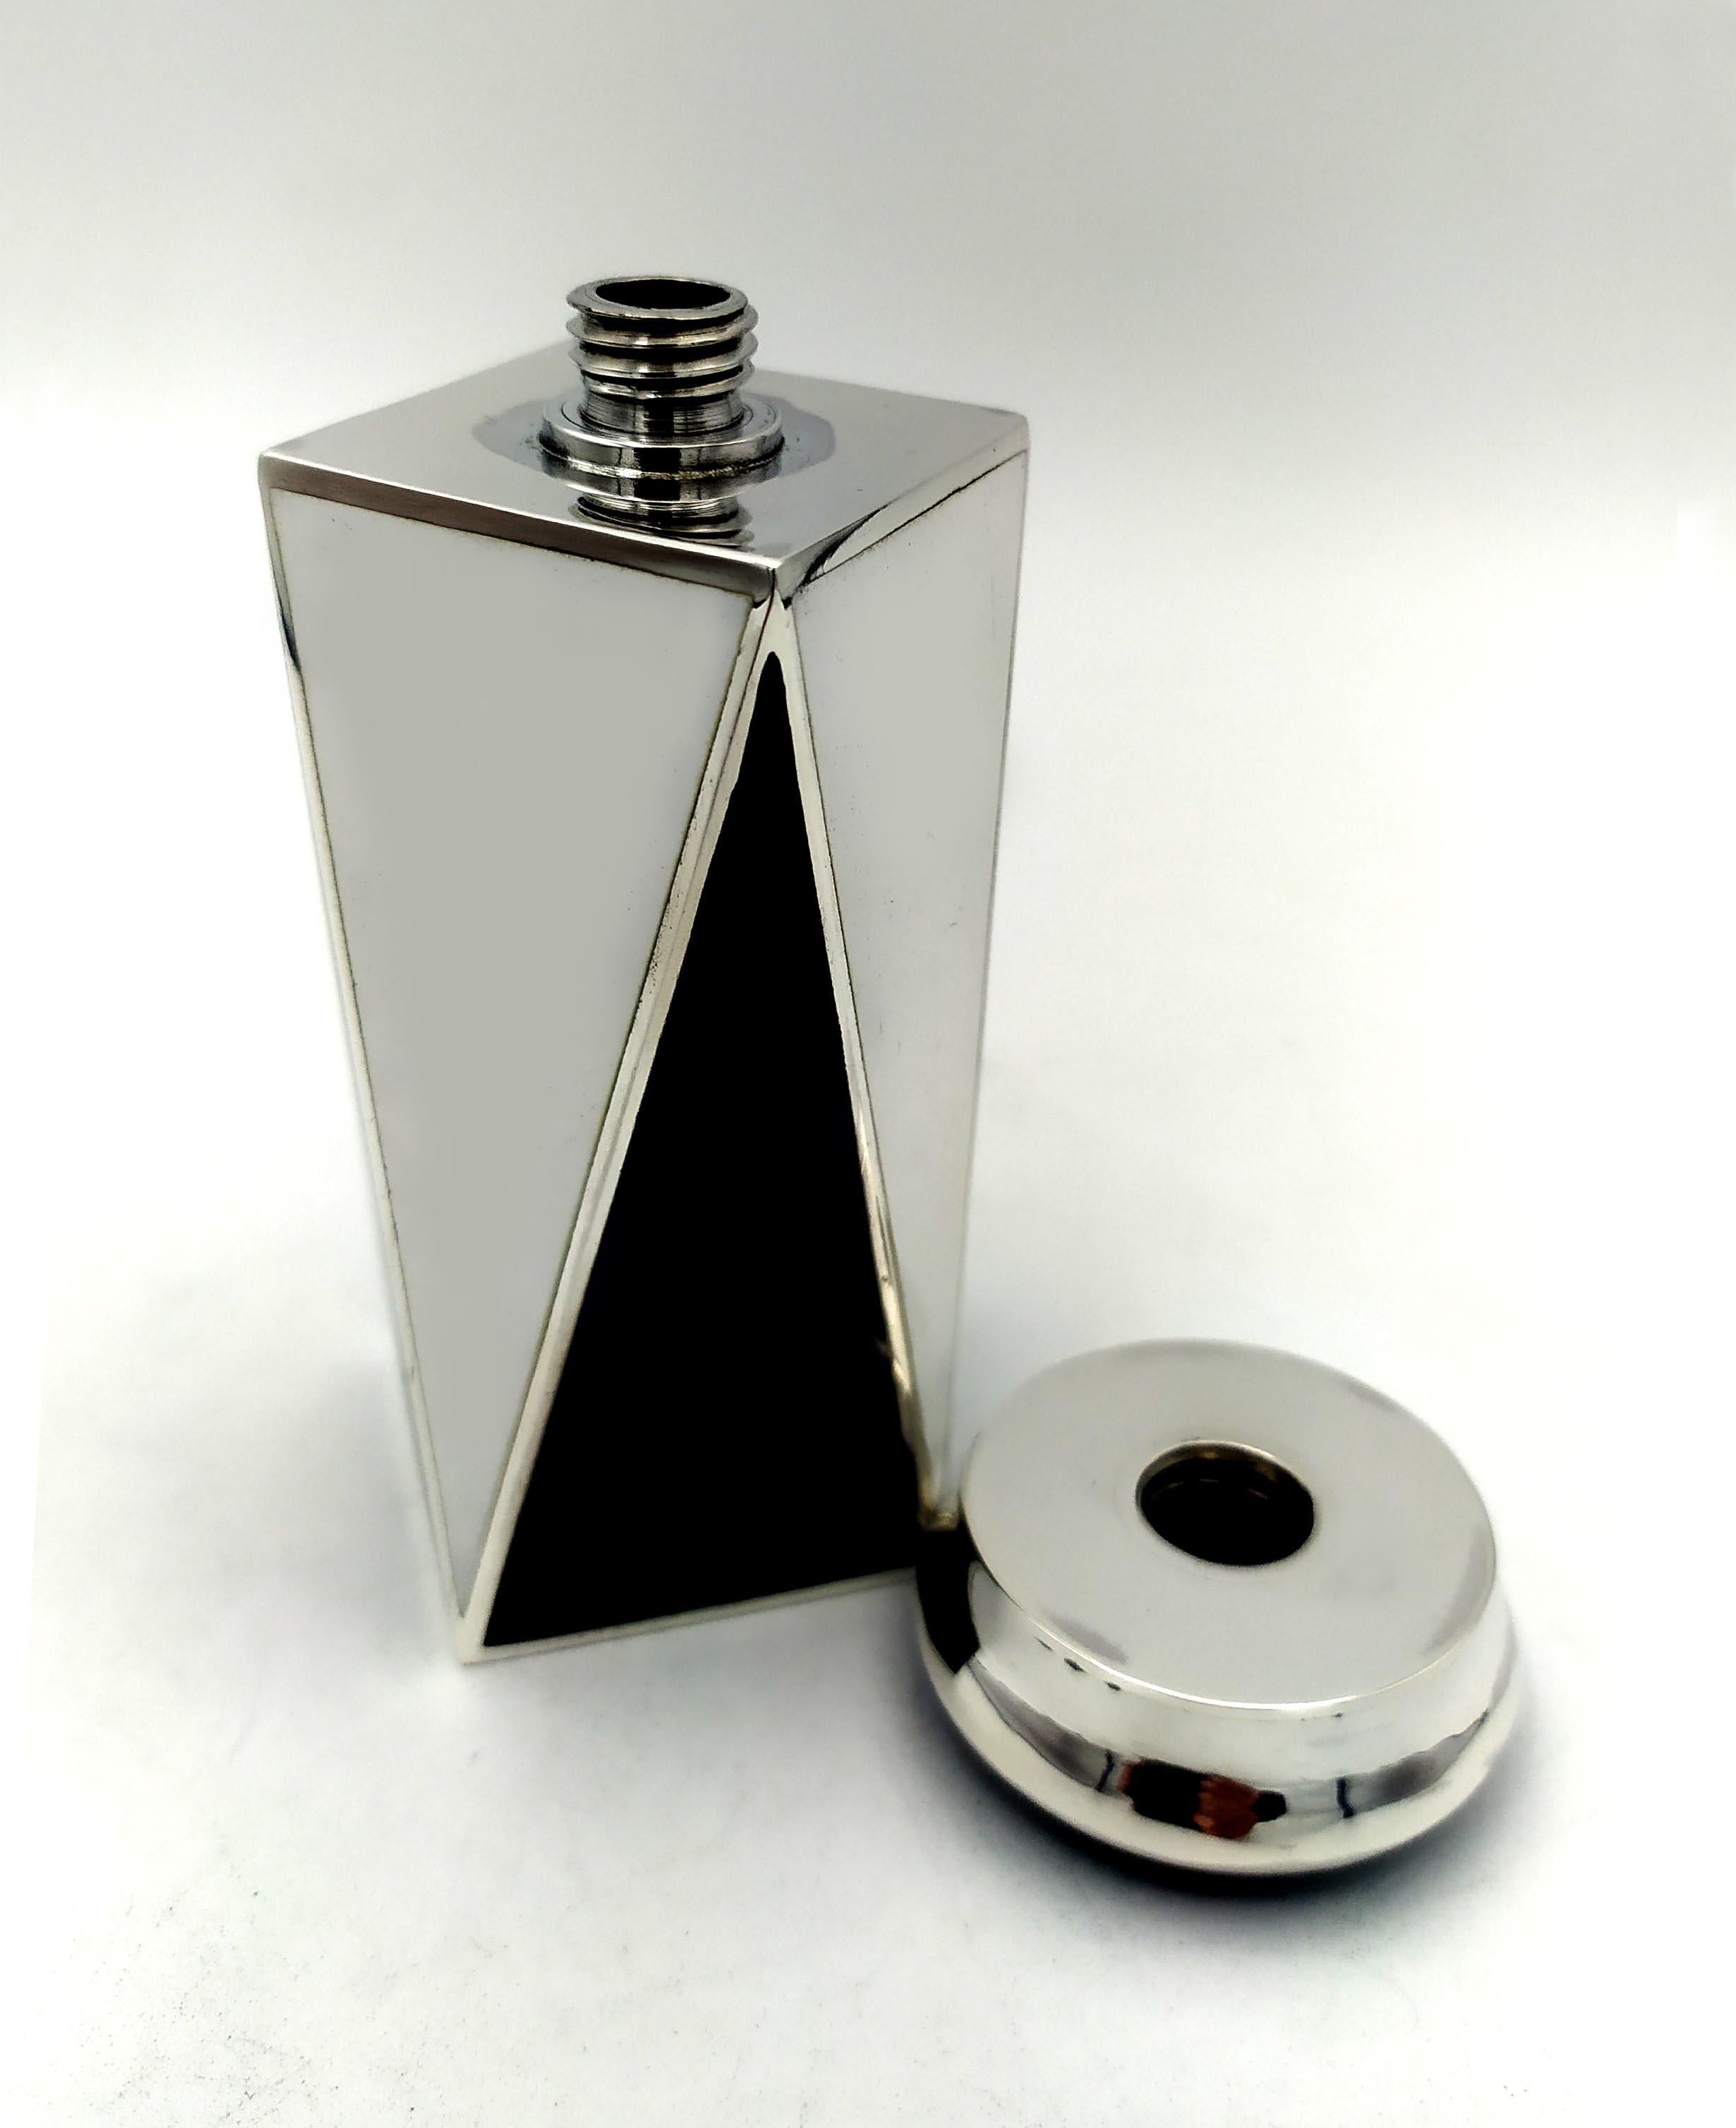 Square base perfume holder in black and white fired enamelled 925/1000 sterling silver with screw cap, in Art Deco style. Base cm, 3.6 x 3.6 bottle height cm. 8, total height cm. 10.7. Silver weight gr. 188. Designed by Giorgio Salimbeni in 1981 and